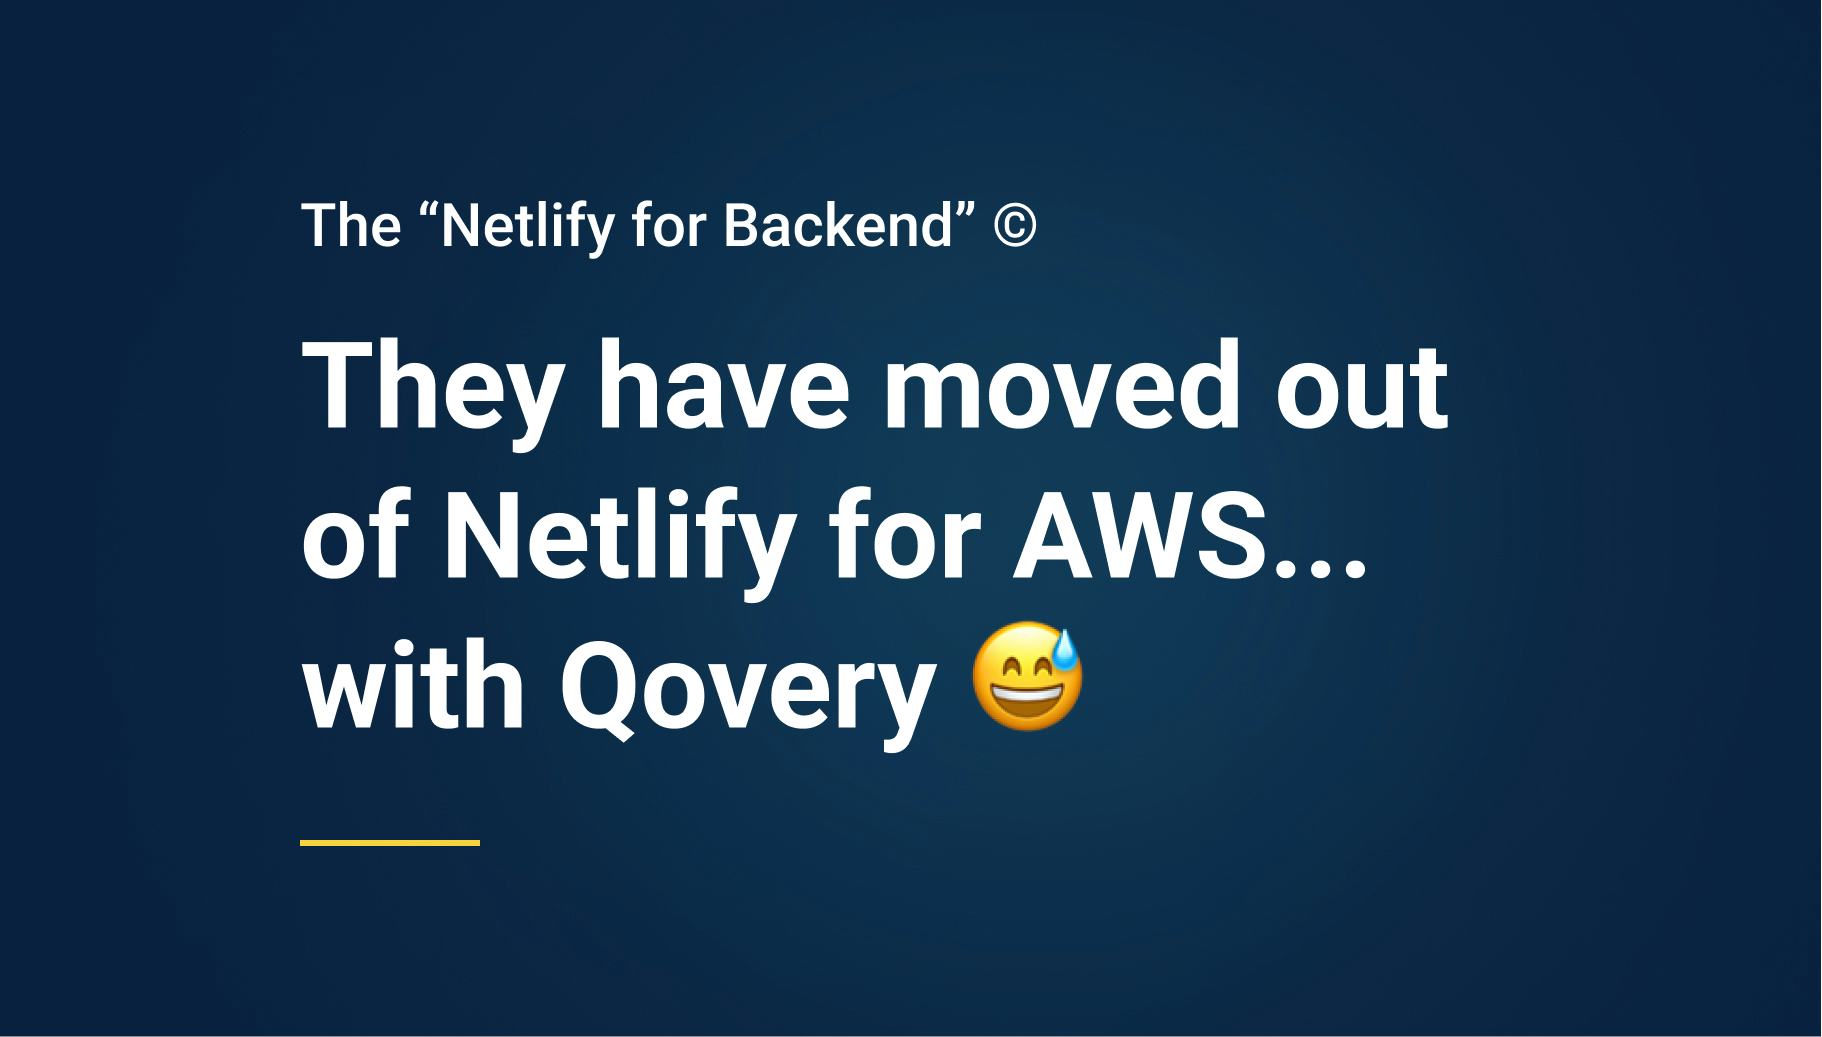 We built the "Netlify for backend" that runs on your AWS account!